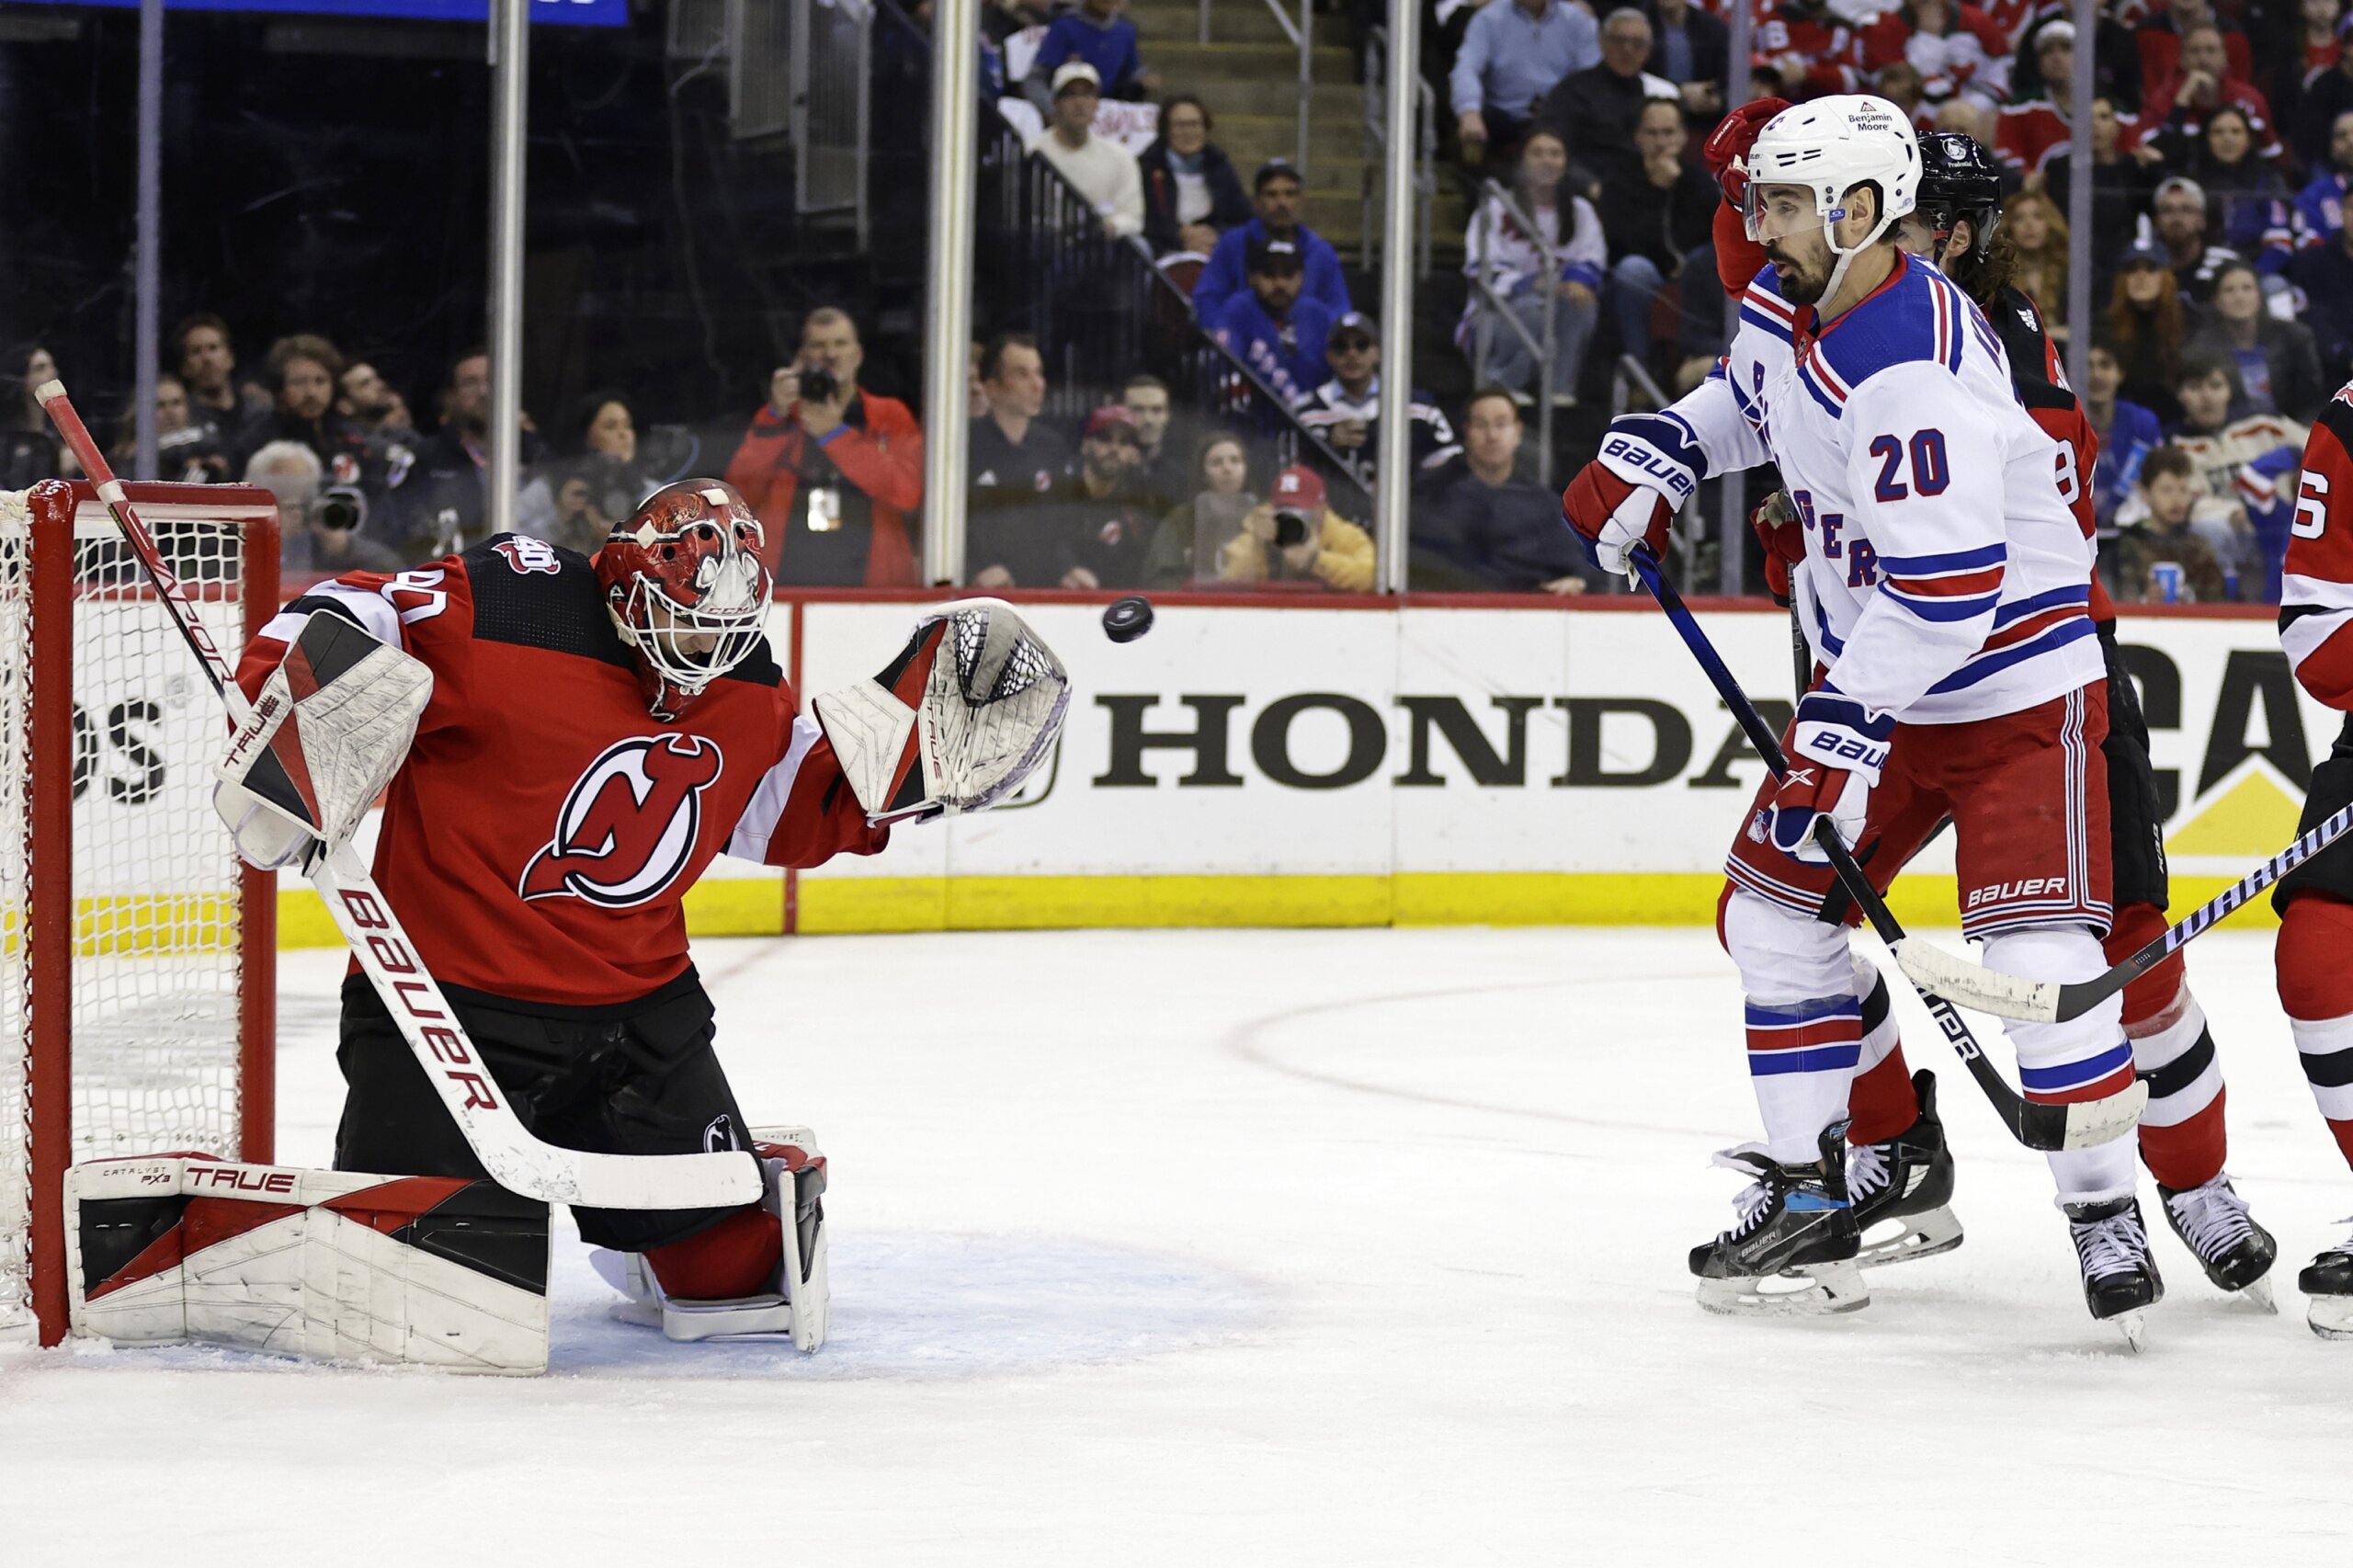 New Jersey Devils: What If the Rangers Didn't Win in '94?